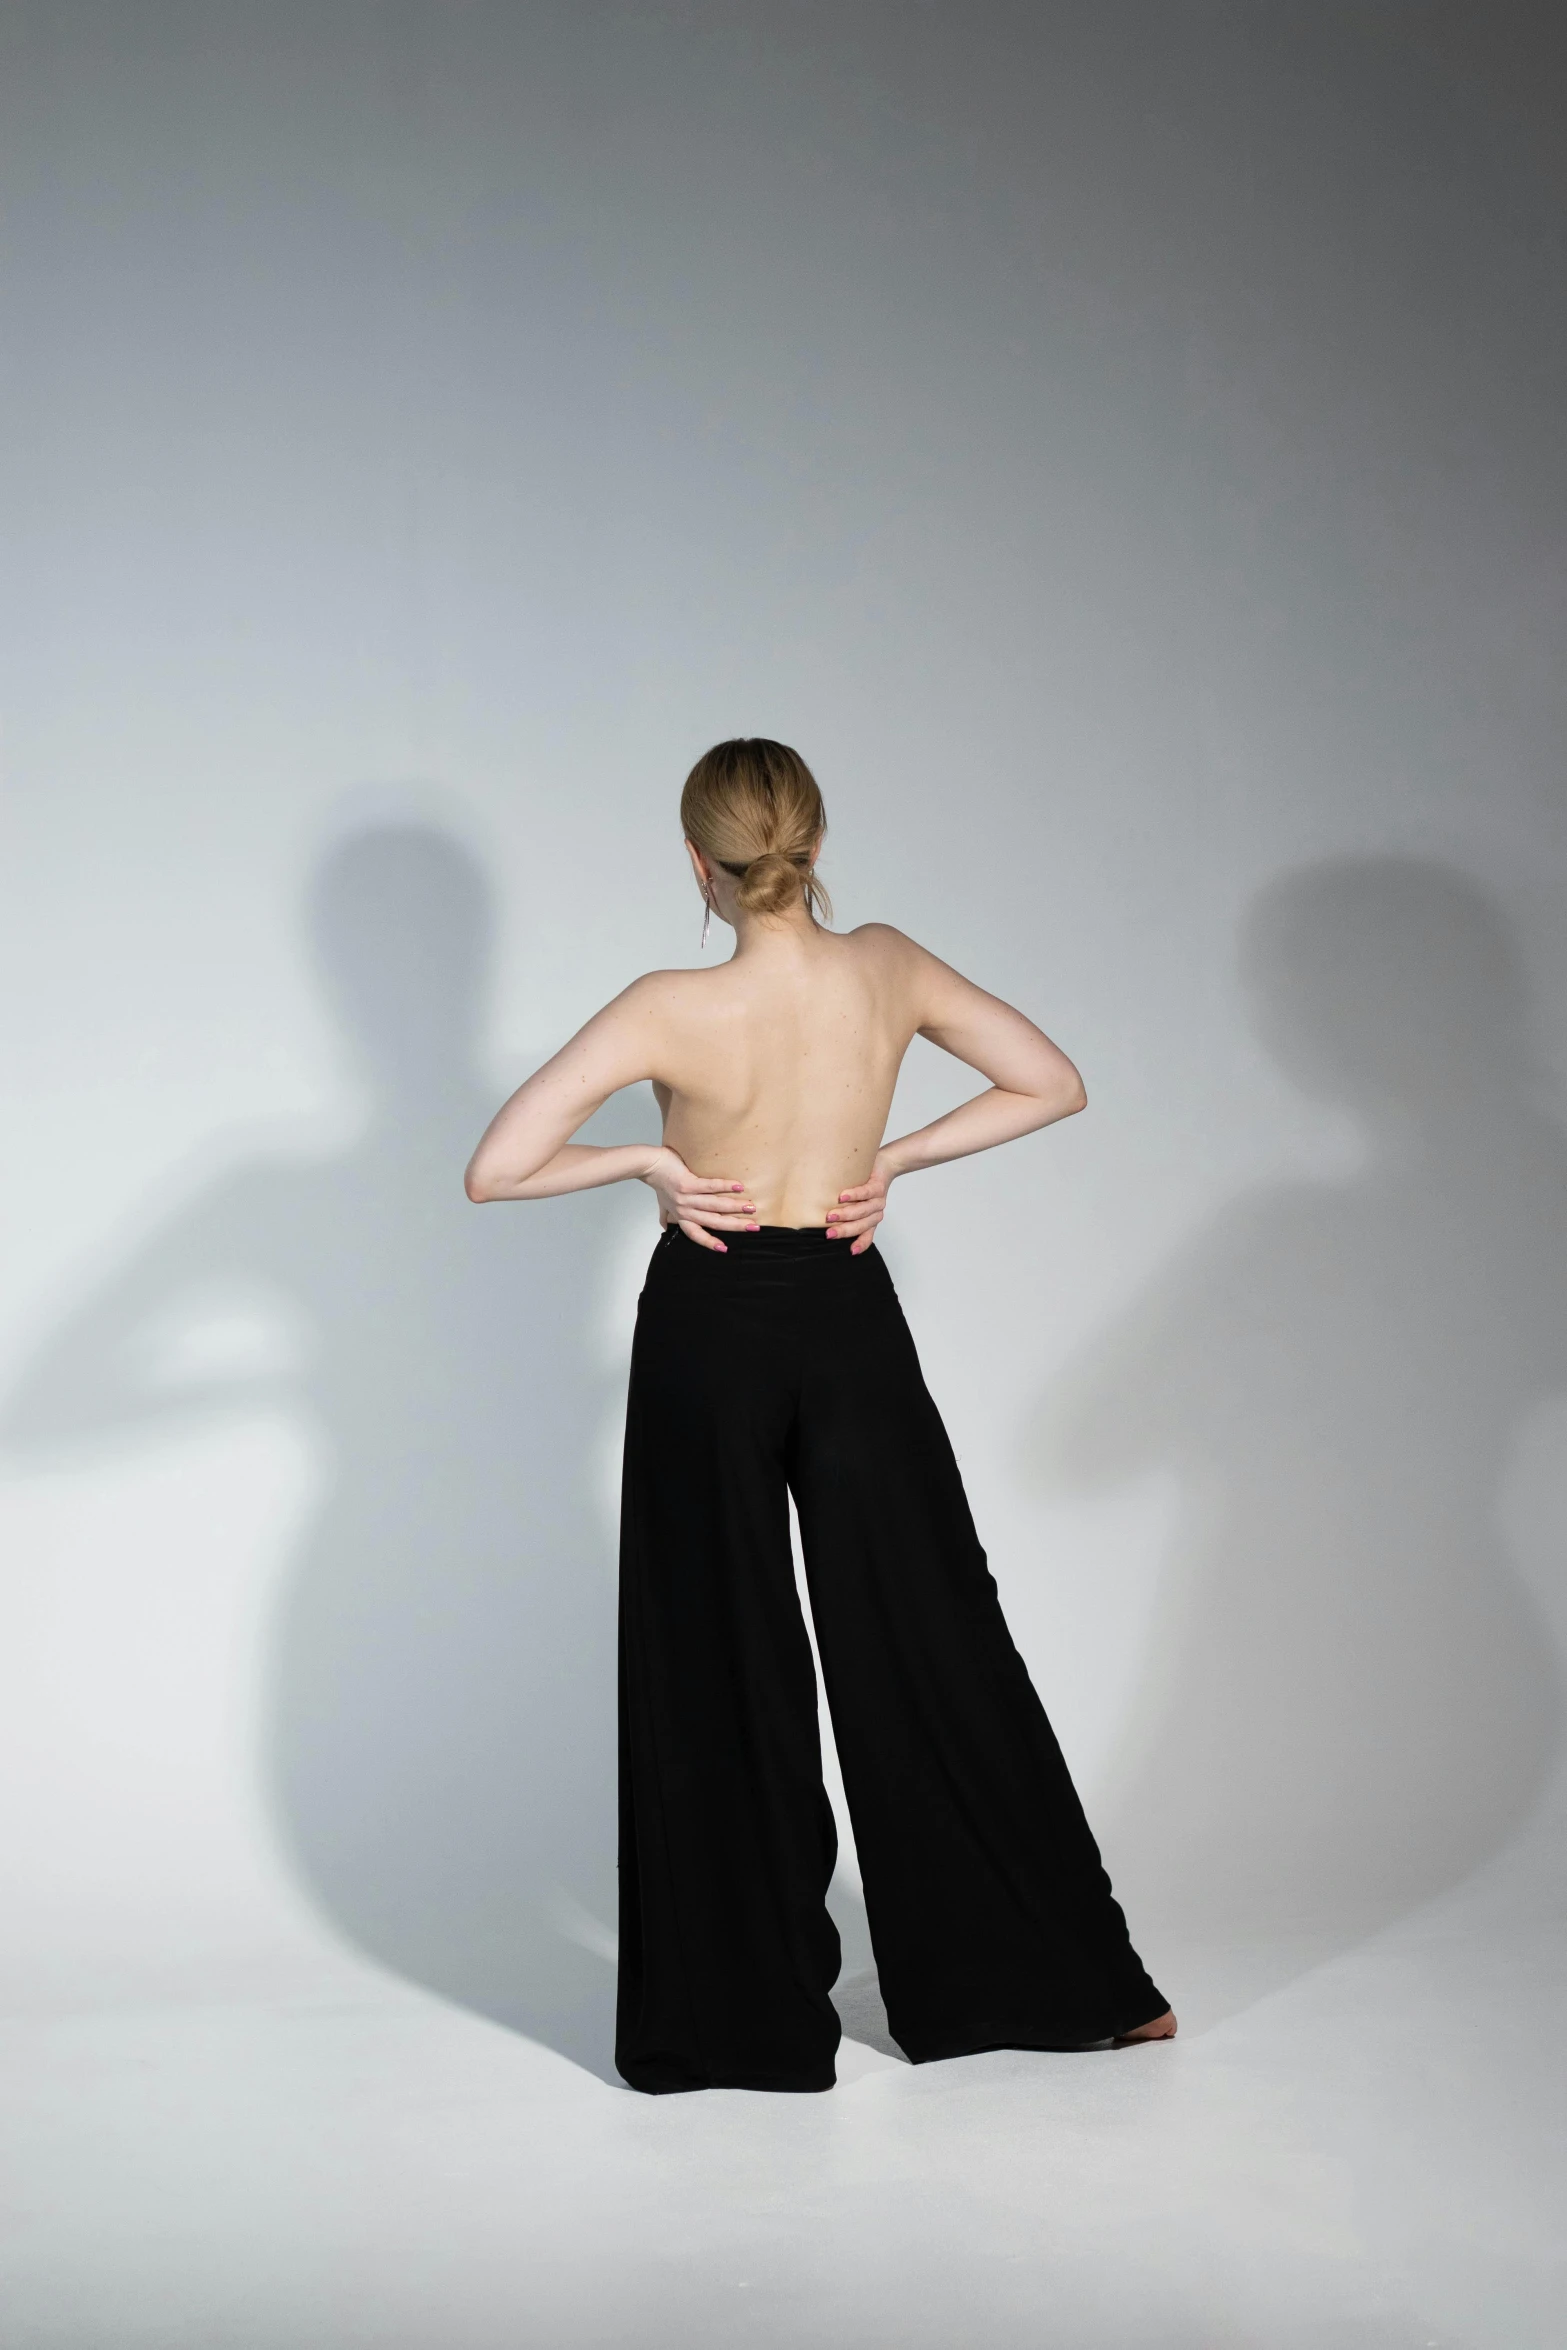 a woman standing with her back to the camera, inspired by Vanessa Beecroft, unsplash, arabesque, large pants, 3 - d shadows, 15081959 21121991 01012000 4k, doing an elegant pose over you